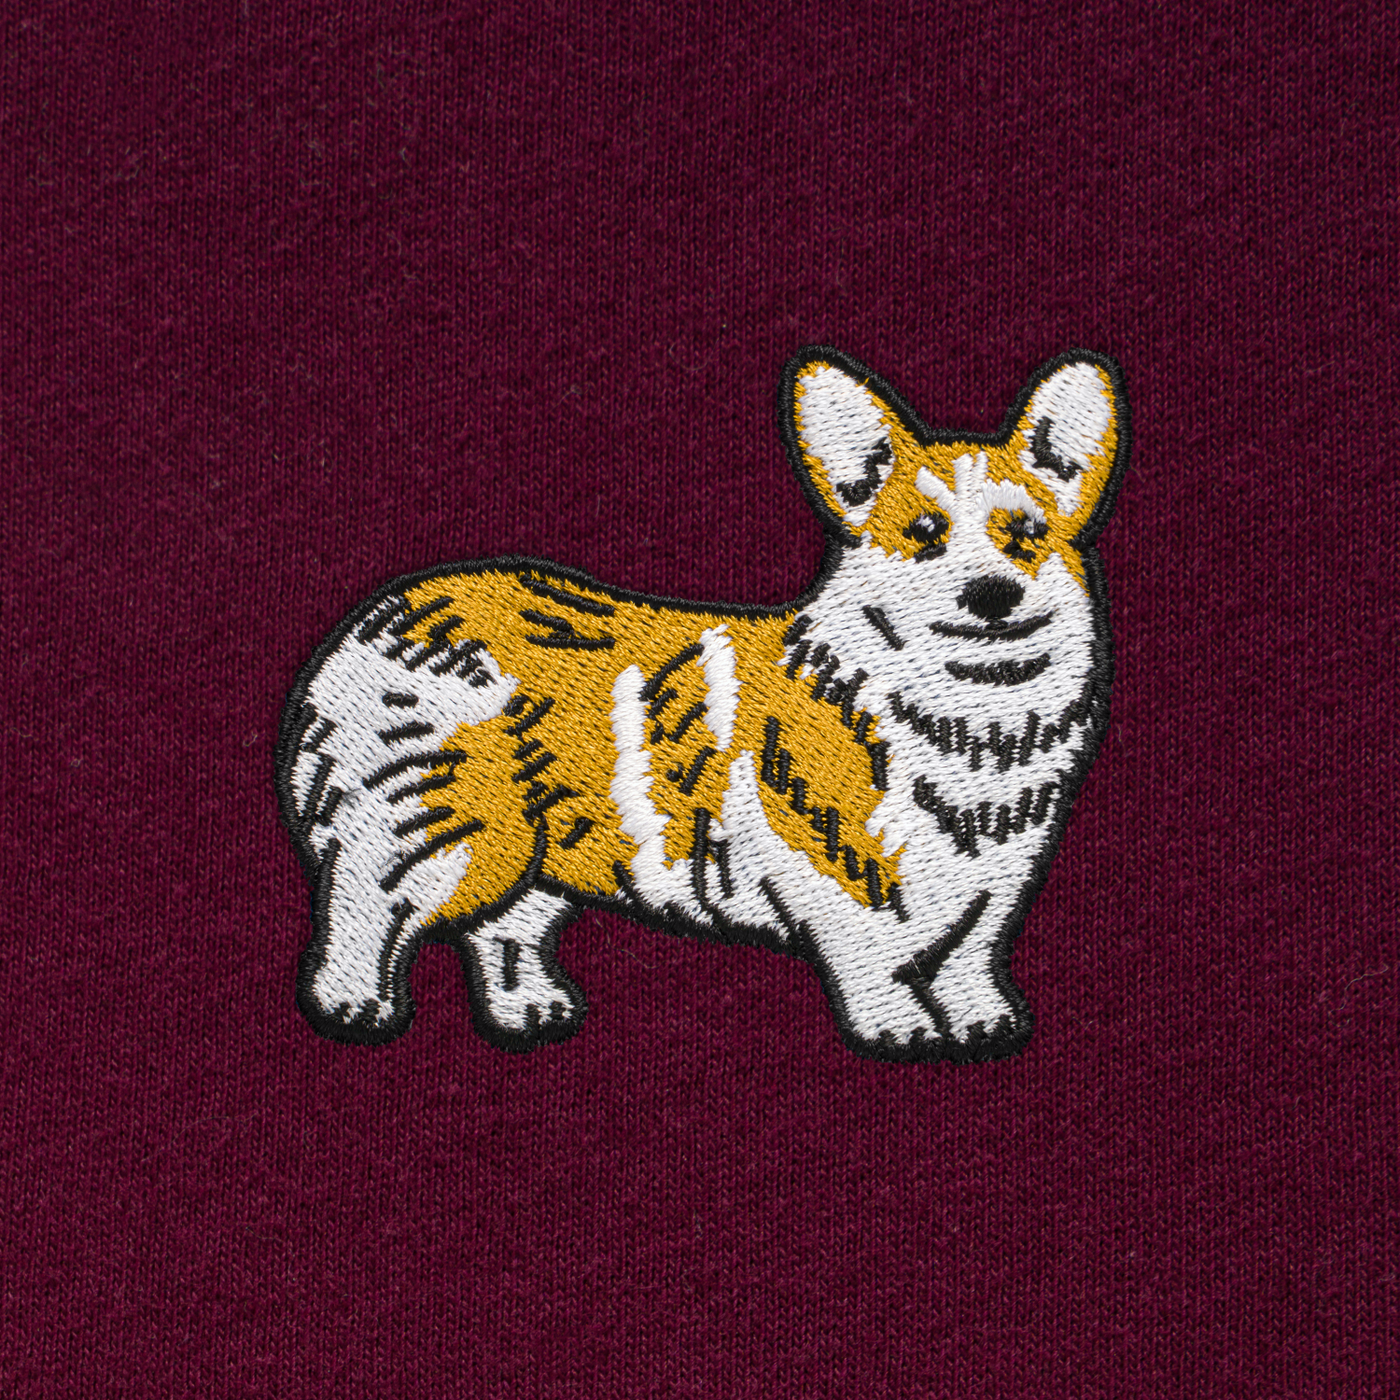 Bobby's Planet Women's Embroidered Corgi Long Sleeve Shirt from Paws Dog Cat Animals Collection in Maroon Color#color_maroon